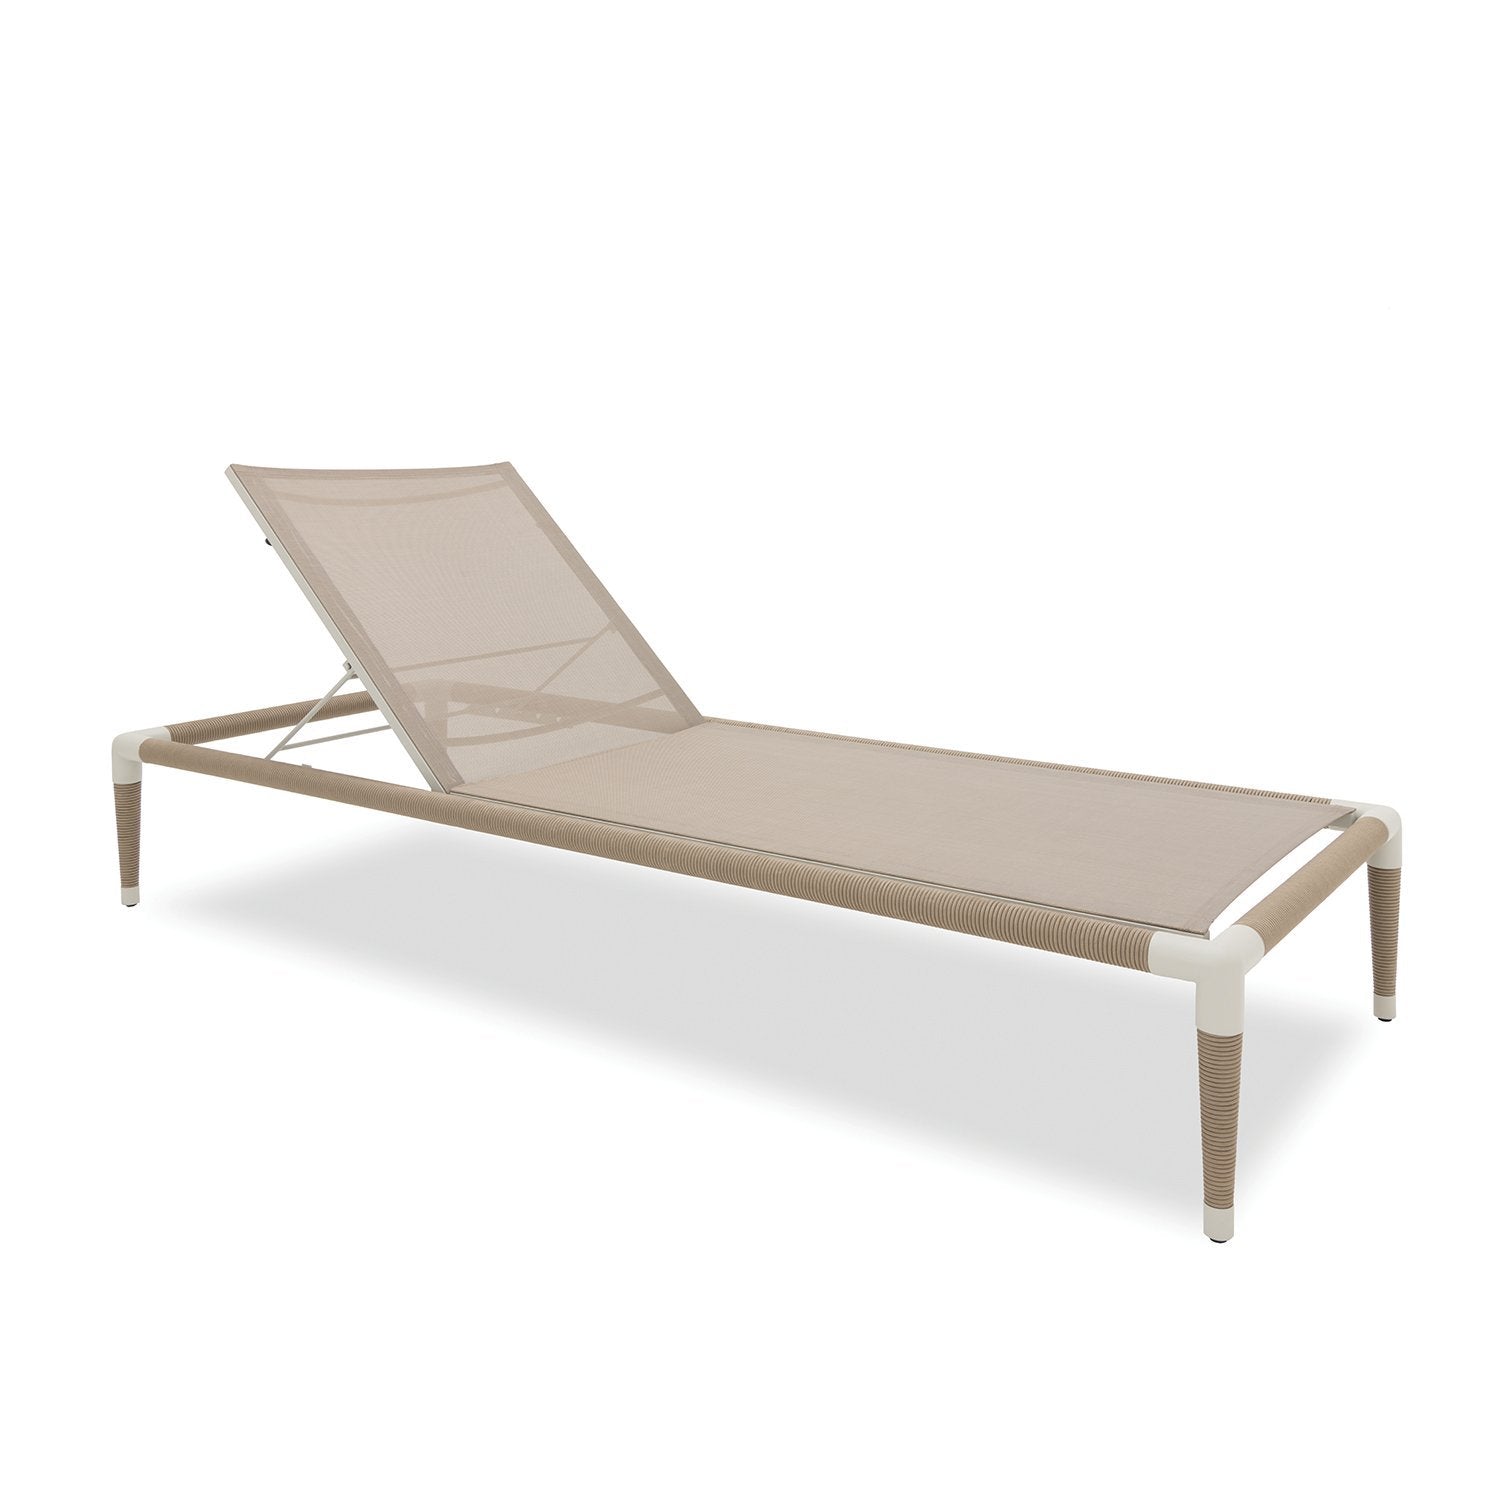 Marina sun lounger in Taupe with rope accents